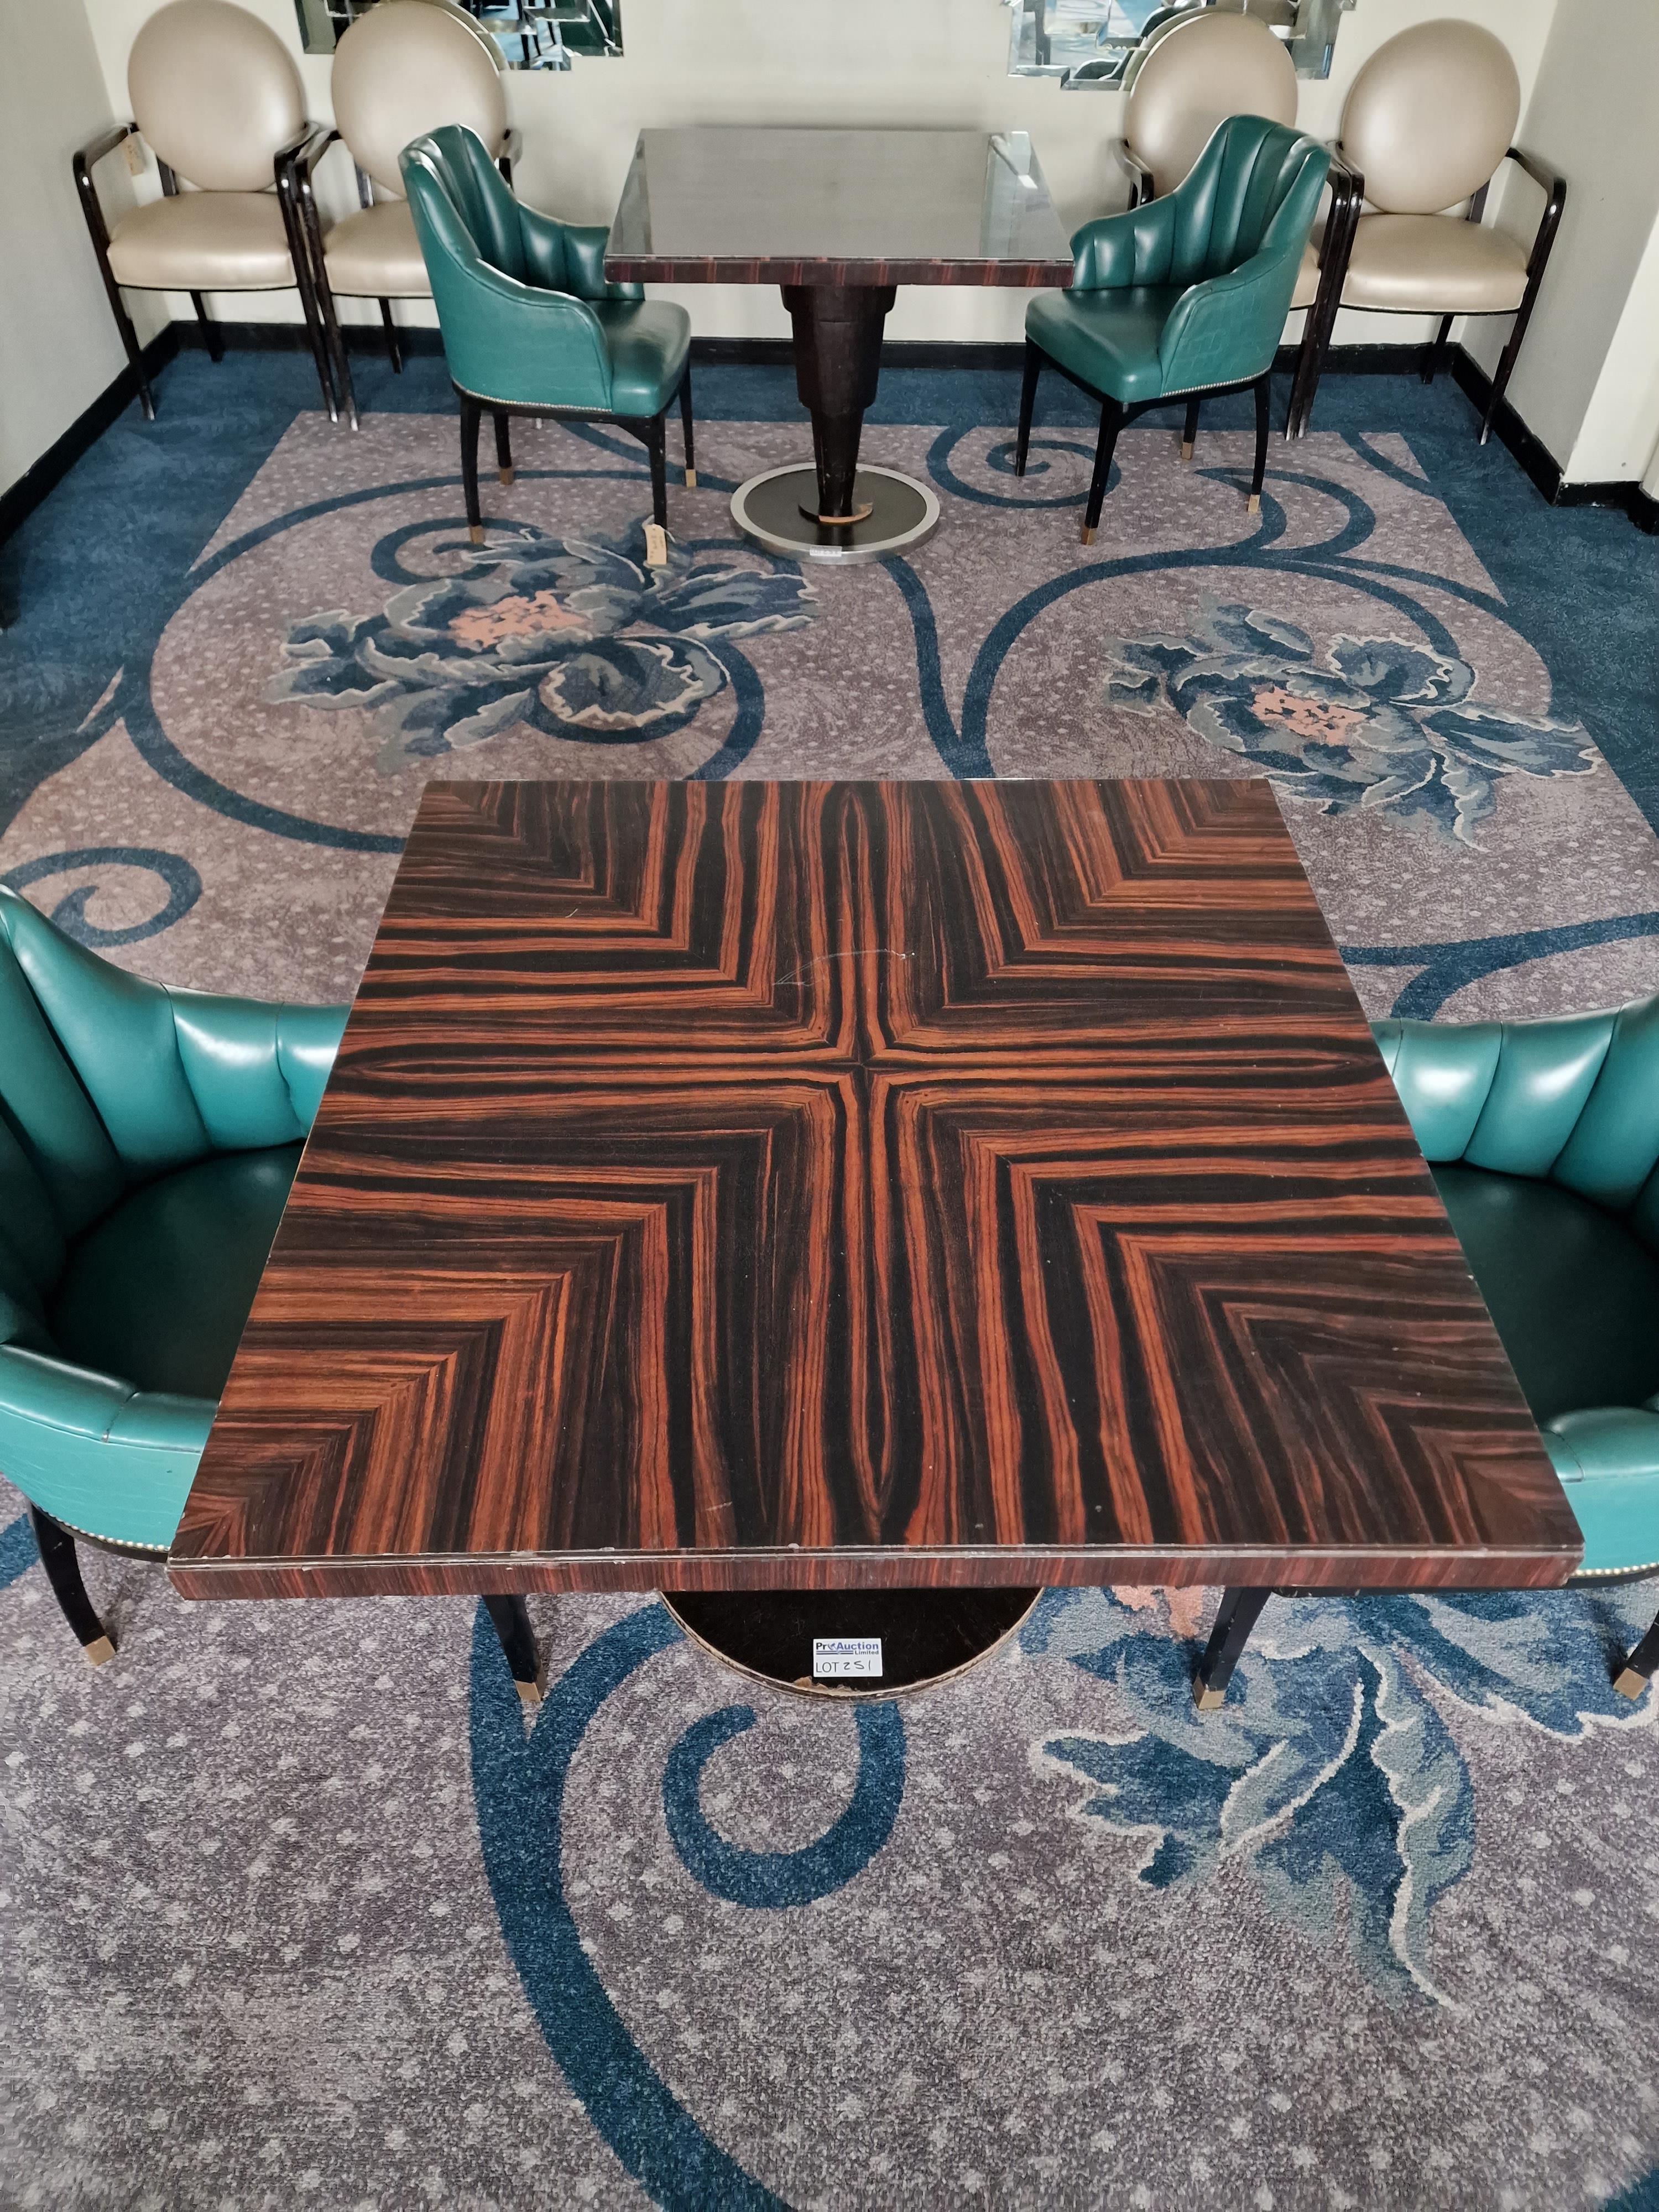 Square dining table art deco style macassar ebony and palm veneer on solid timber frame mounted on - Image 3 of 3